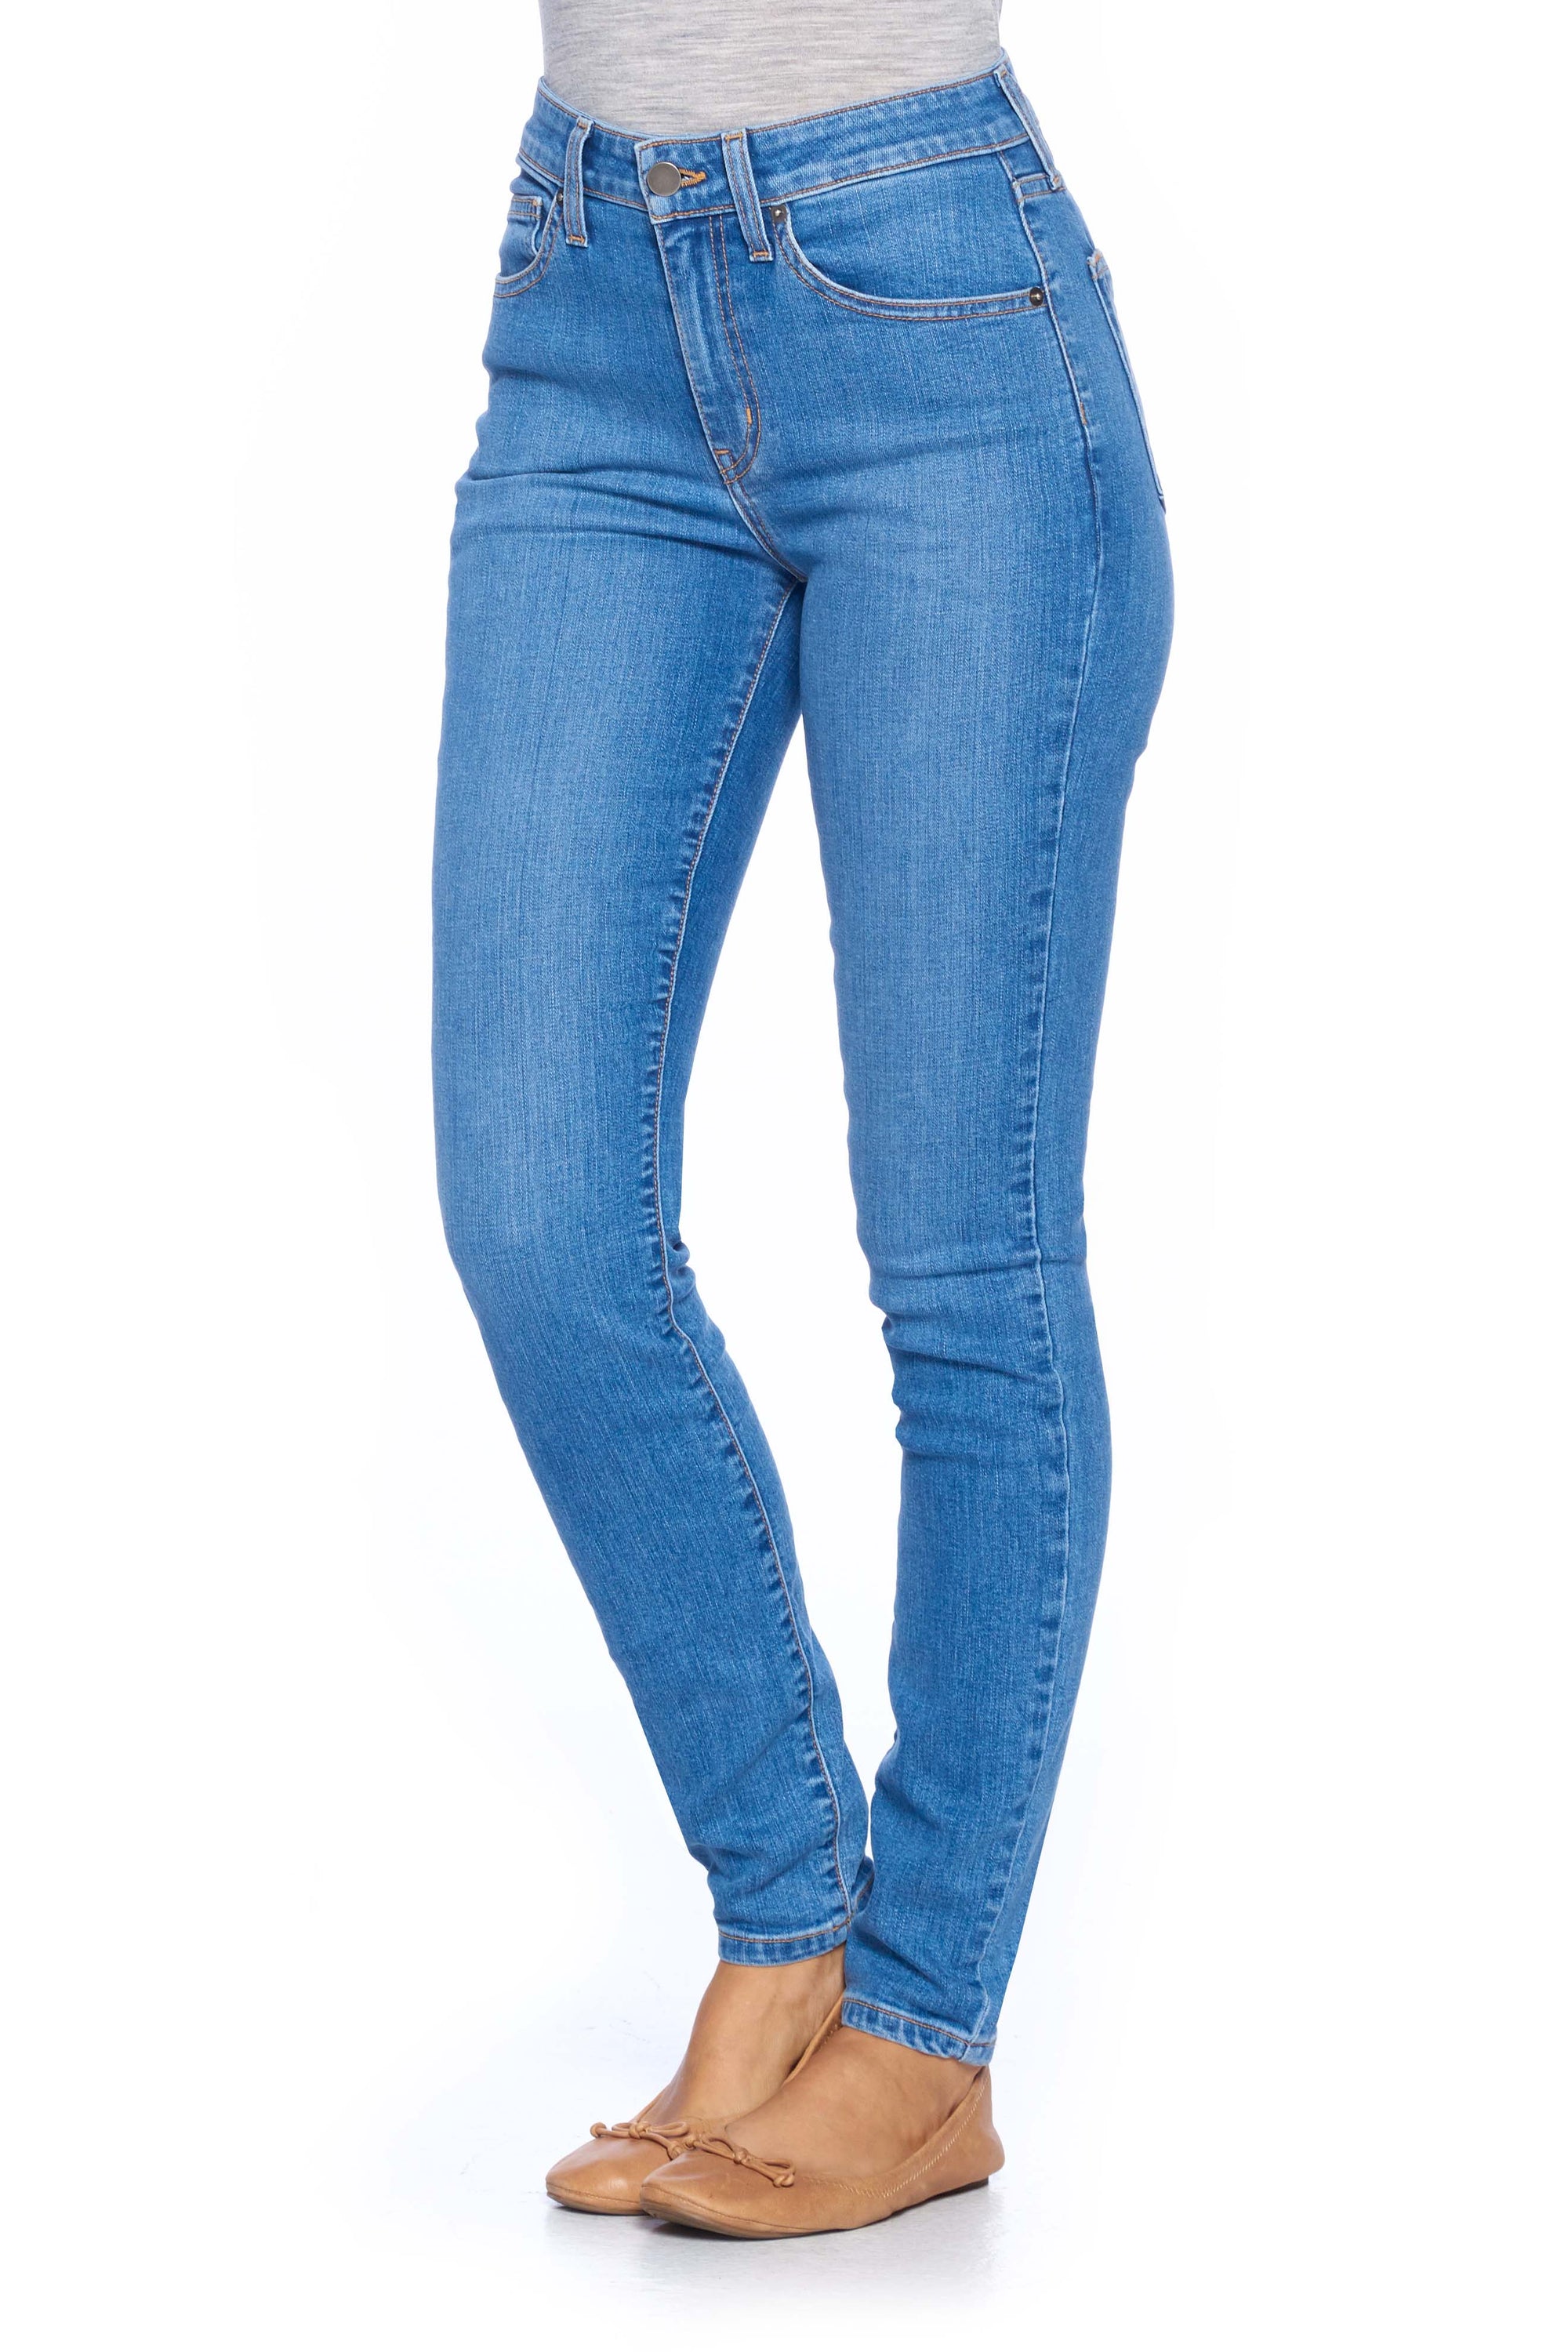 Best Travel Jeans for Women | Skinny | Faded Indigo | Made in the USA ...